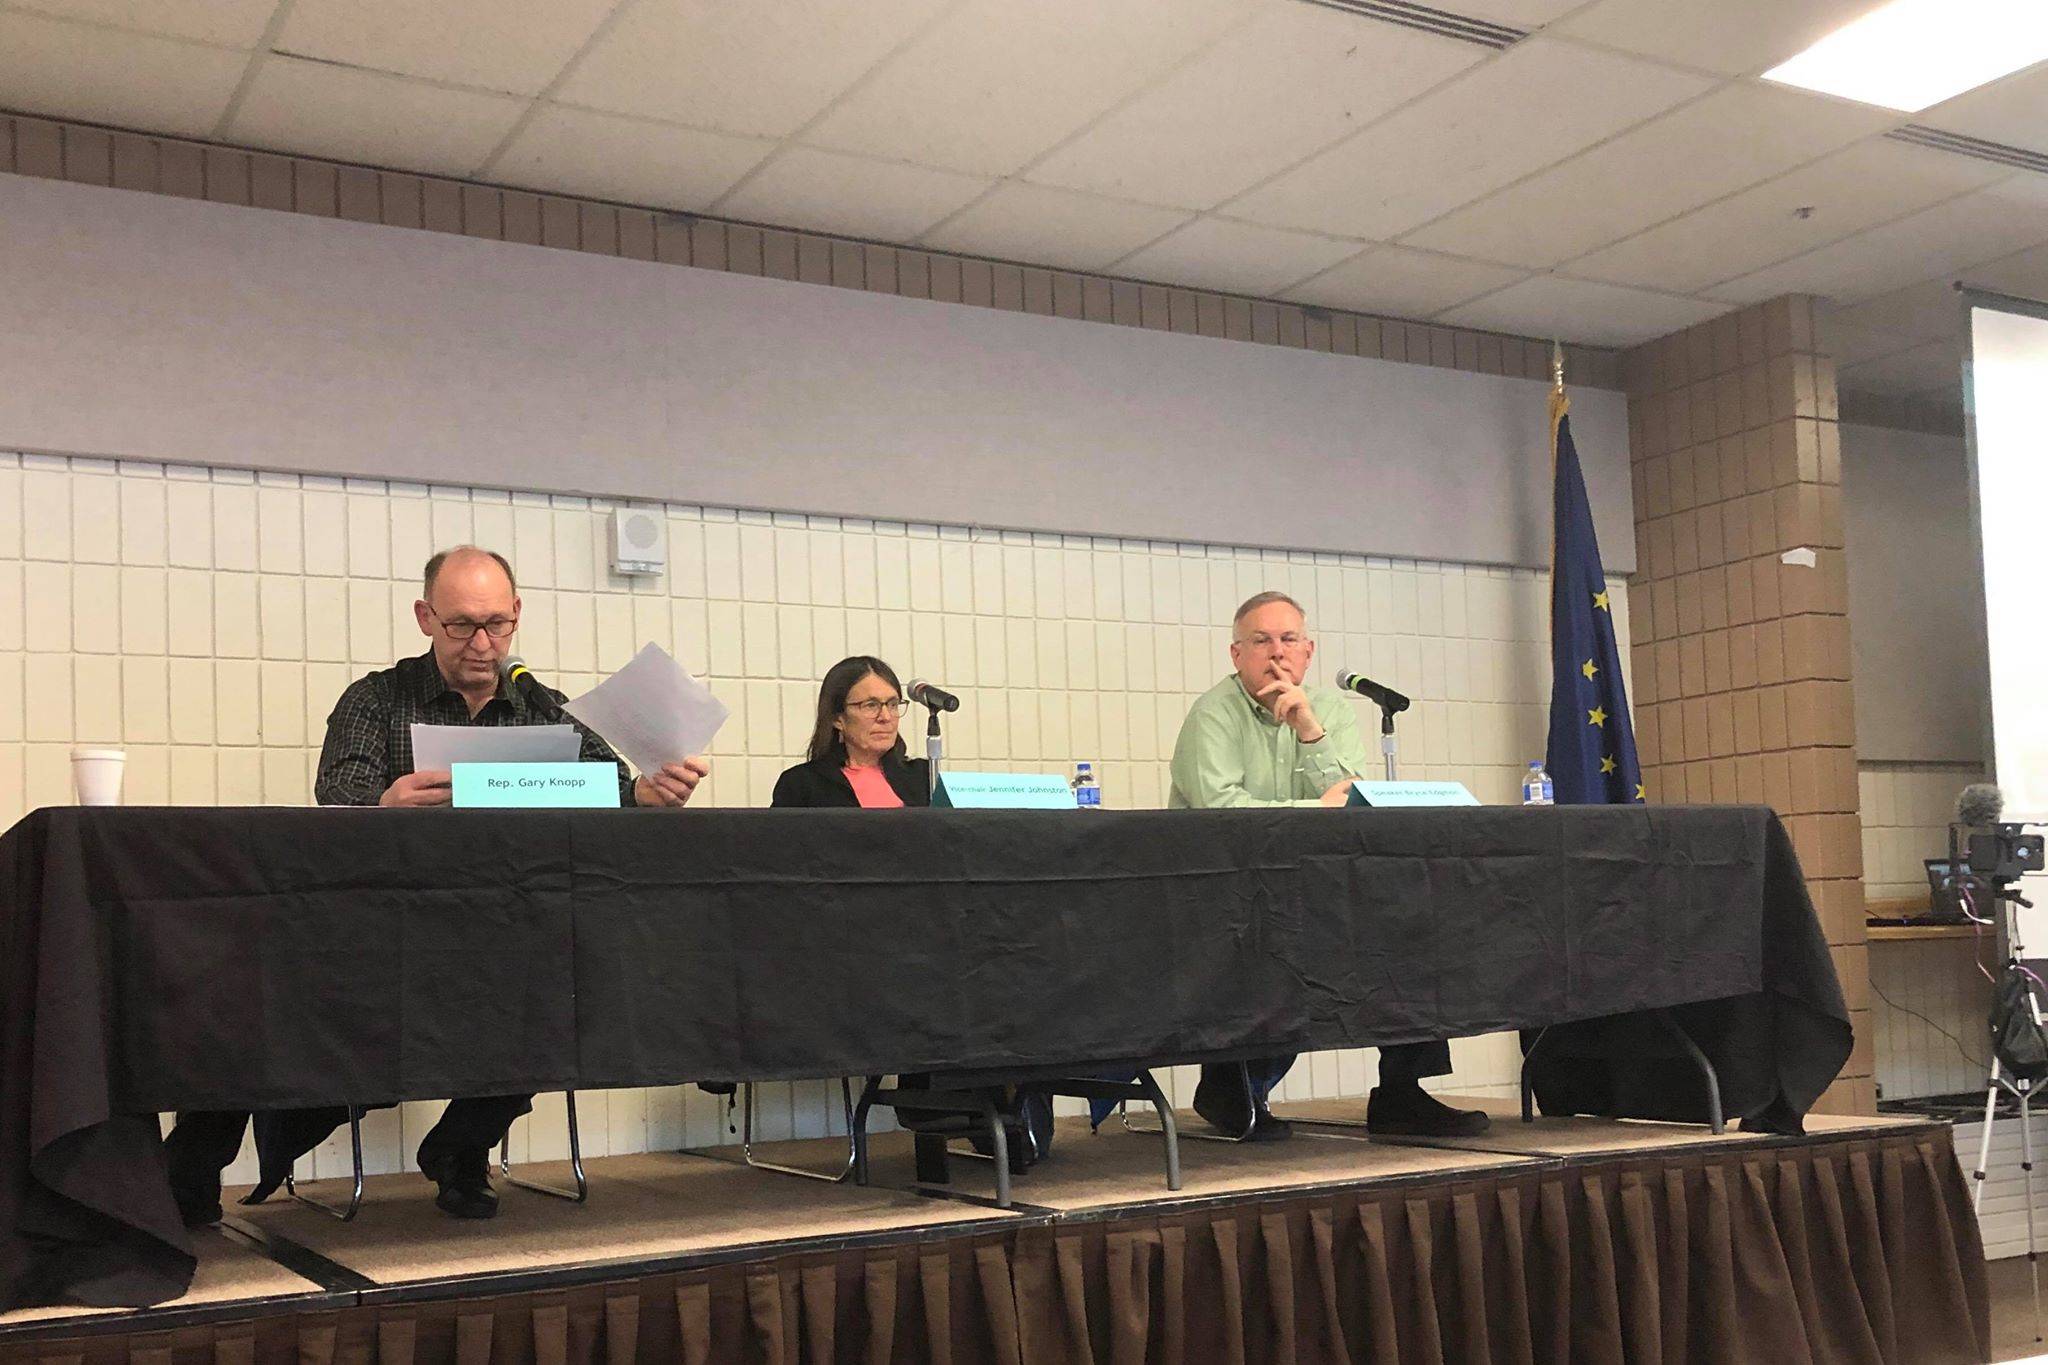 Rep. Gary Knopp (R-Kenai/Soldotna), House Speaker Bryce Edgmon (I-Dillingham) and Vice-Chair of the House Finance Committee Janice Johnston (R-Anchorage) listen to public testimony at a local House Finance Committee meeting at the Soldotna Sports Complex on Saturday, March 23, 2019 in Soldotna, Alaska. (Photo by Victoria Petersen/Peninsula Clarion)